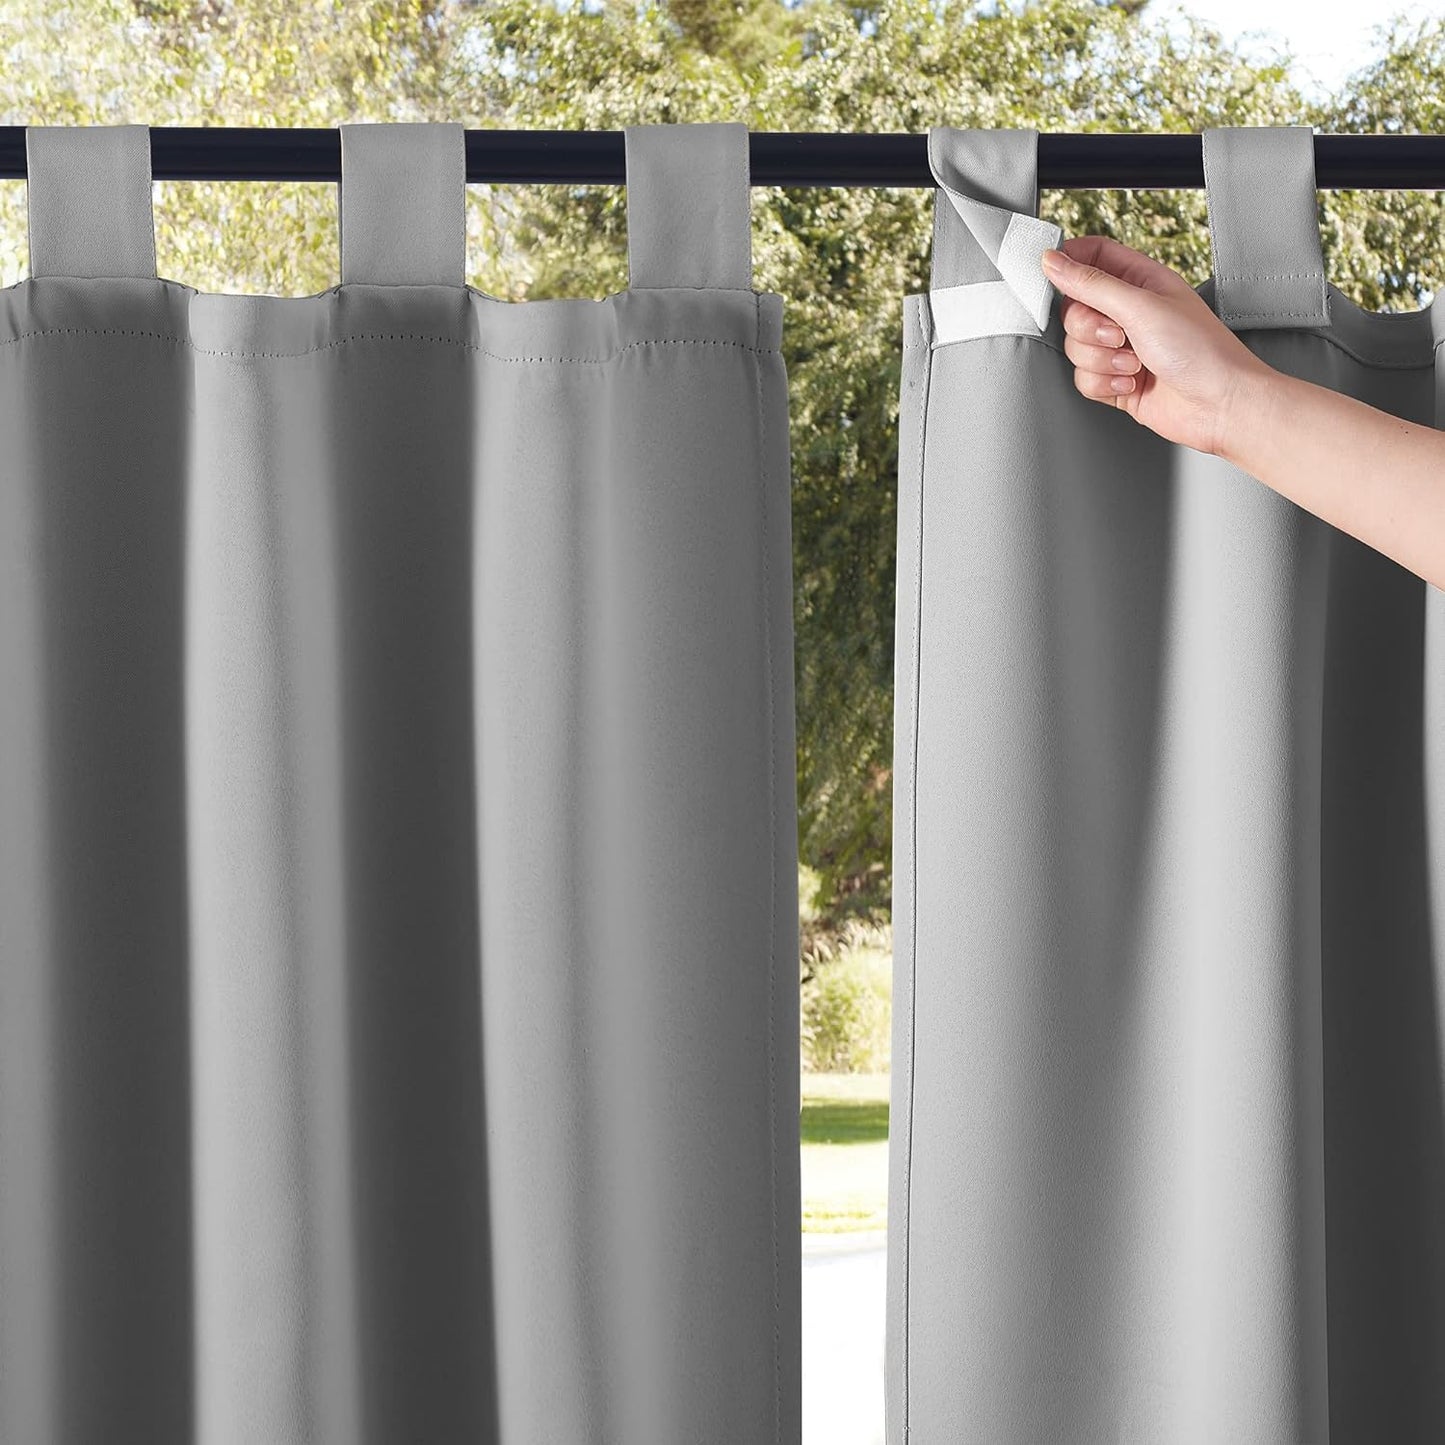 NICETOWN 2 Panels Outdoor Patio Curtainss Waterproof Room Darkening Drapes, Detachable Sticky Tab Top Thermal Insulated Privacy Outdoor Dividers for Porch/Doorway, Biscotti Beige, W52 X L84  NICETOWN Silver Grey W52 X L84 